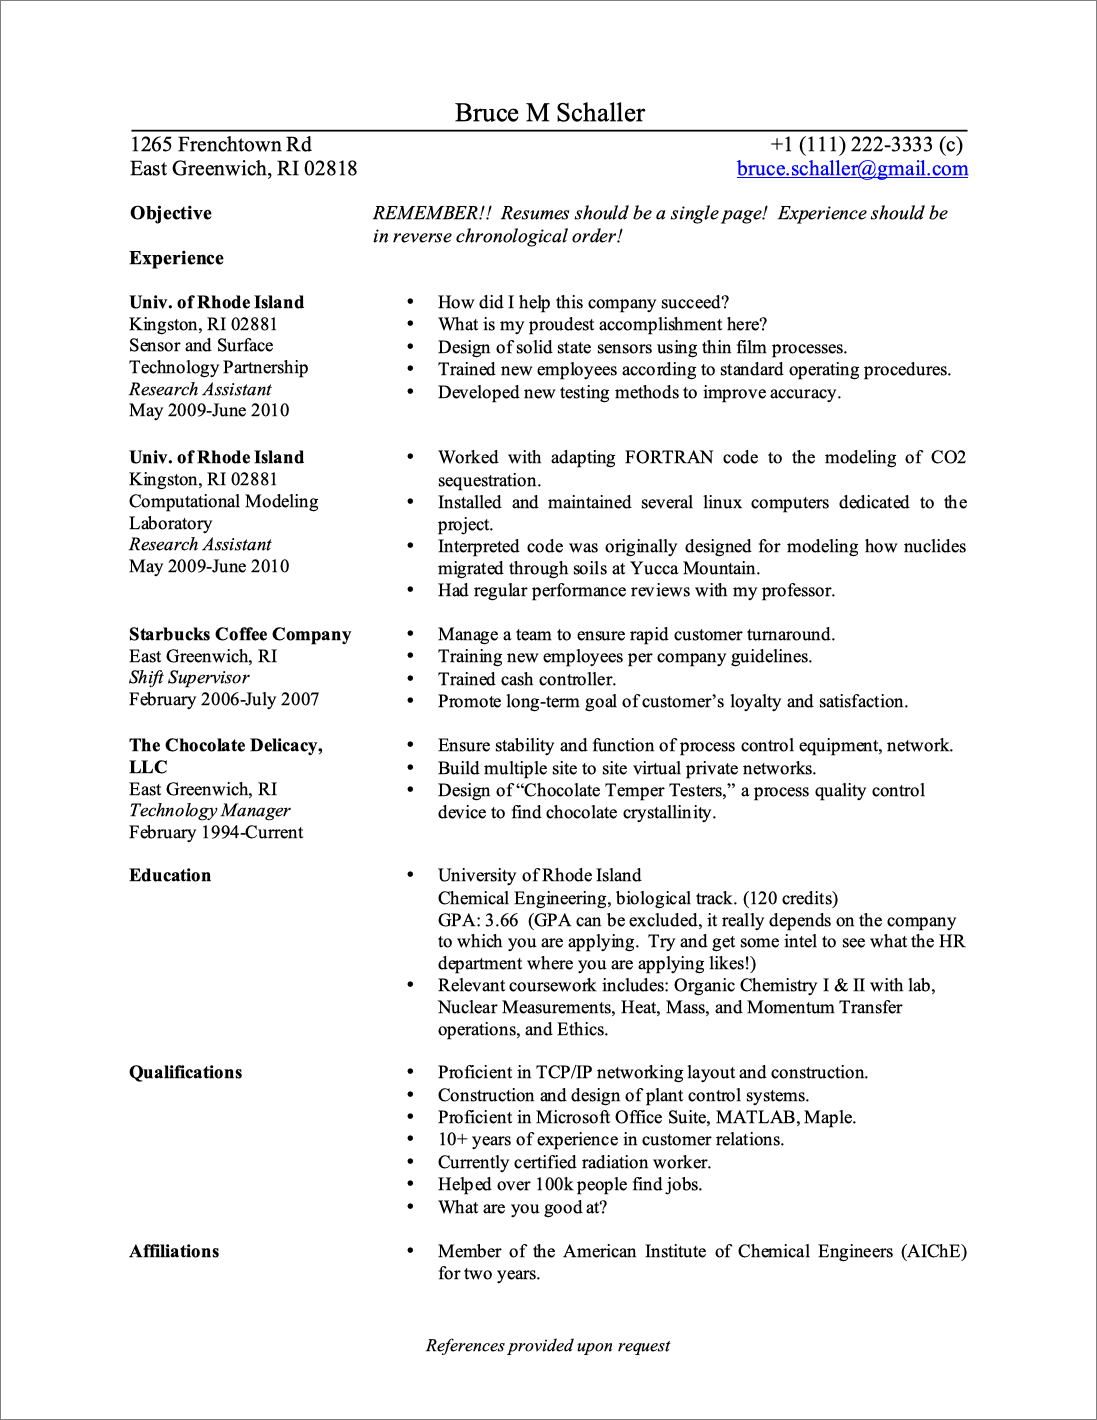 Open Office Resume Template